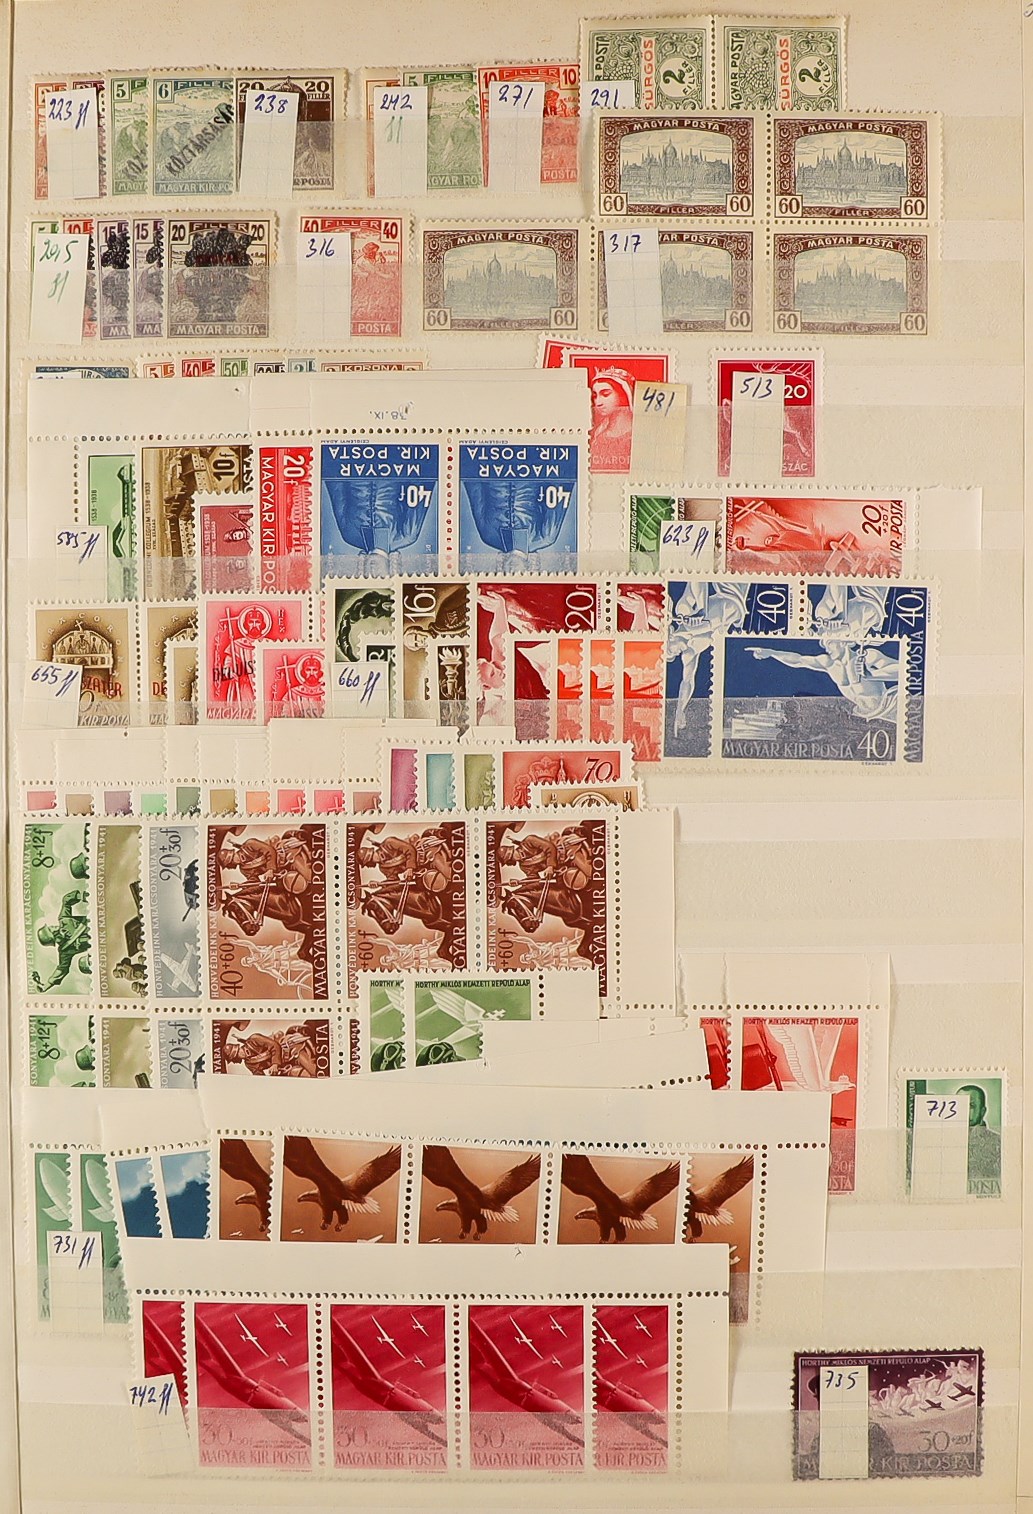 COLLECTIONS & ACCUMULATIONS WORLD WIDE MINT / NEVER HINGED MINT STAMPS in stock books, packets, - Image 2 of 17